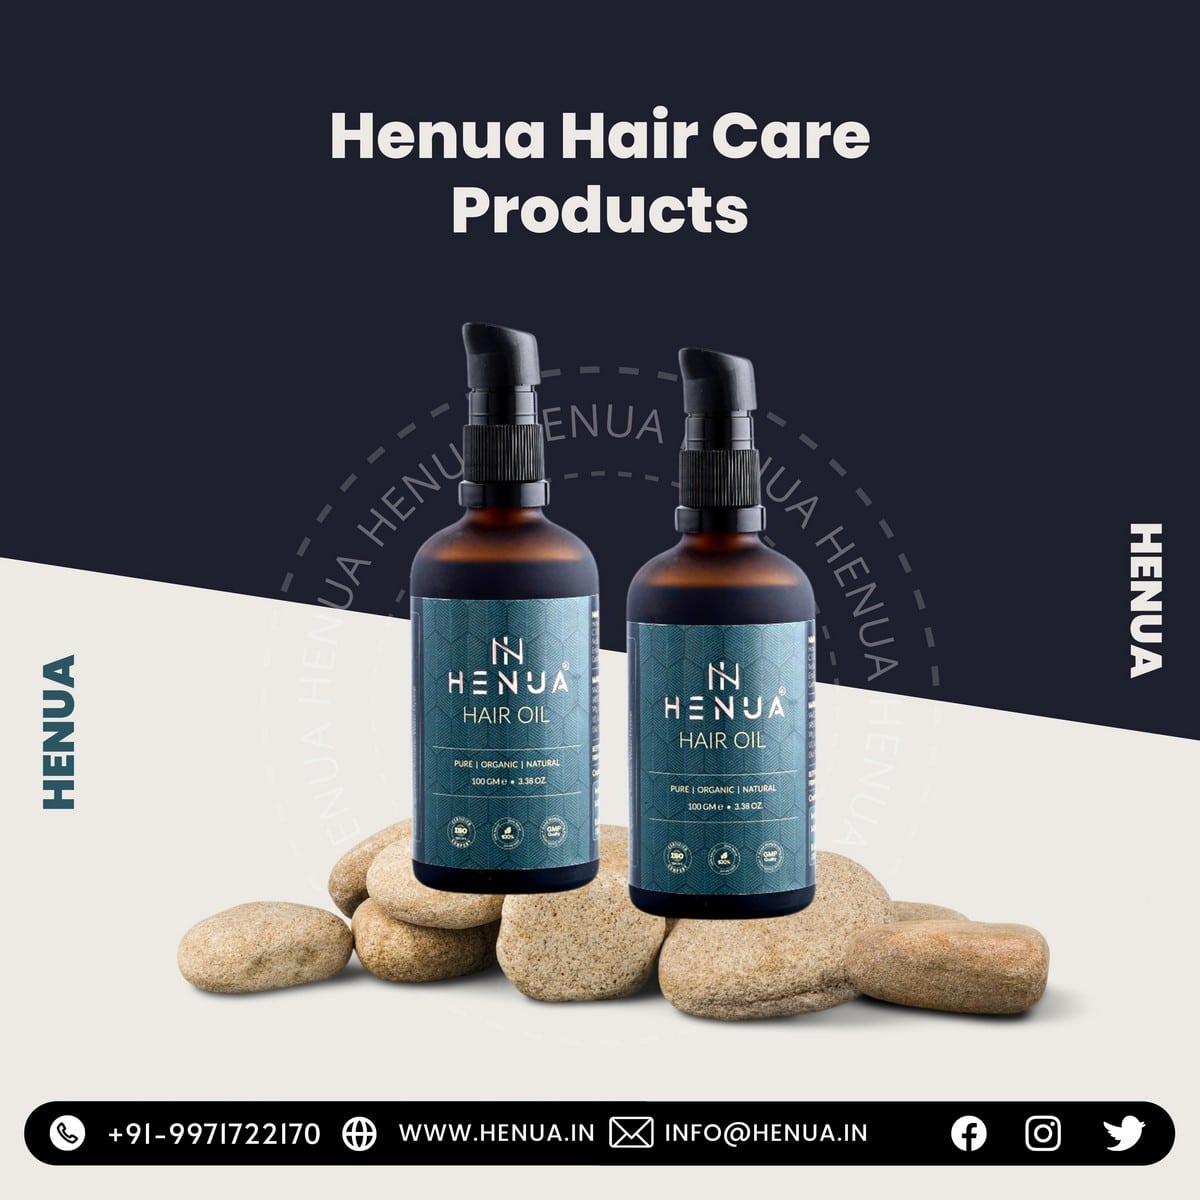 Get-The-Best-Hair-Done-With-Henua-Hair-Care-Products